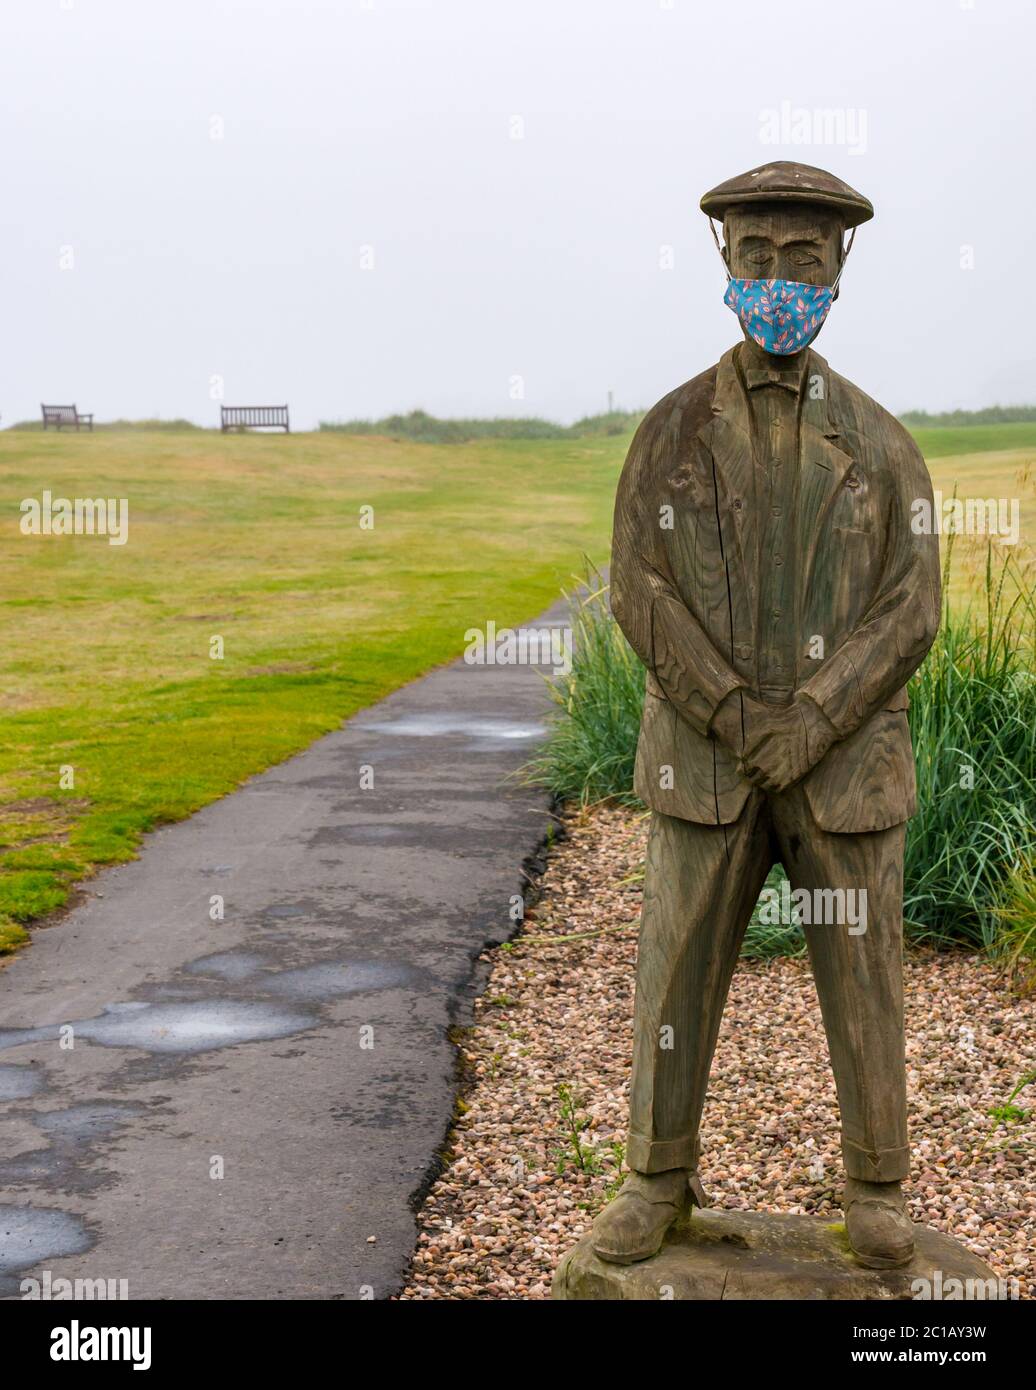 North Berwick, East Lothian, Scotland, United Kingdom, 15th June 2020. UK Weather: thick fog continues for the 3rd day in East Lothian with few people in the popular seaside town. A wooden statue of Ben Sayers, a 19th century professional golf player by Ed Robinson, has acquired a colourful face mask on Rotary Way on Elcho Green Stock Photo